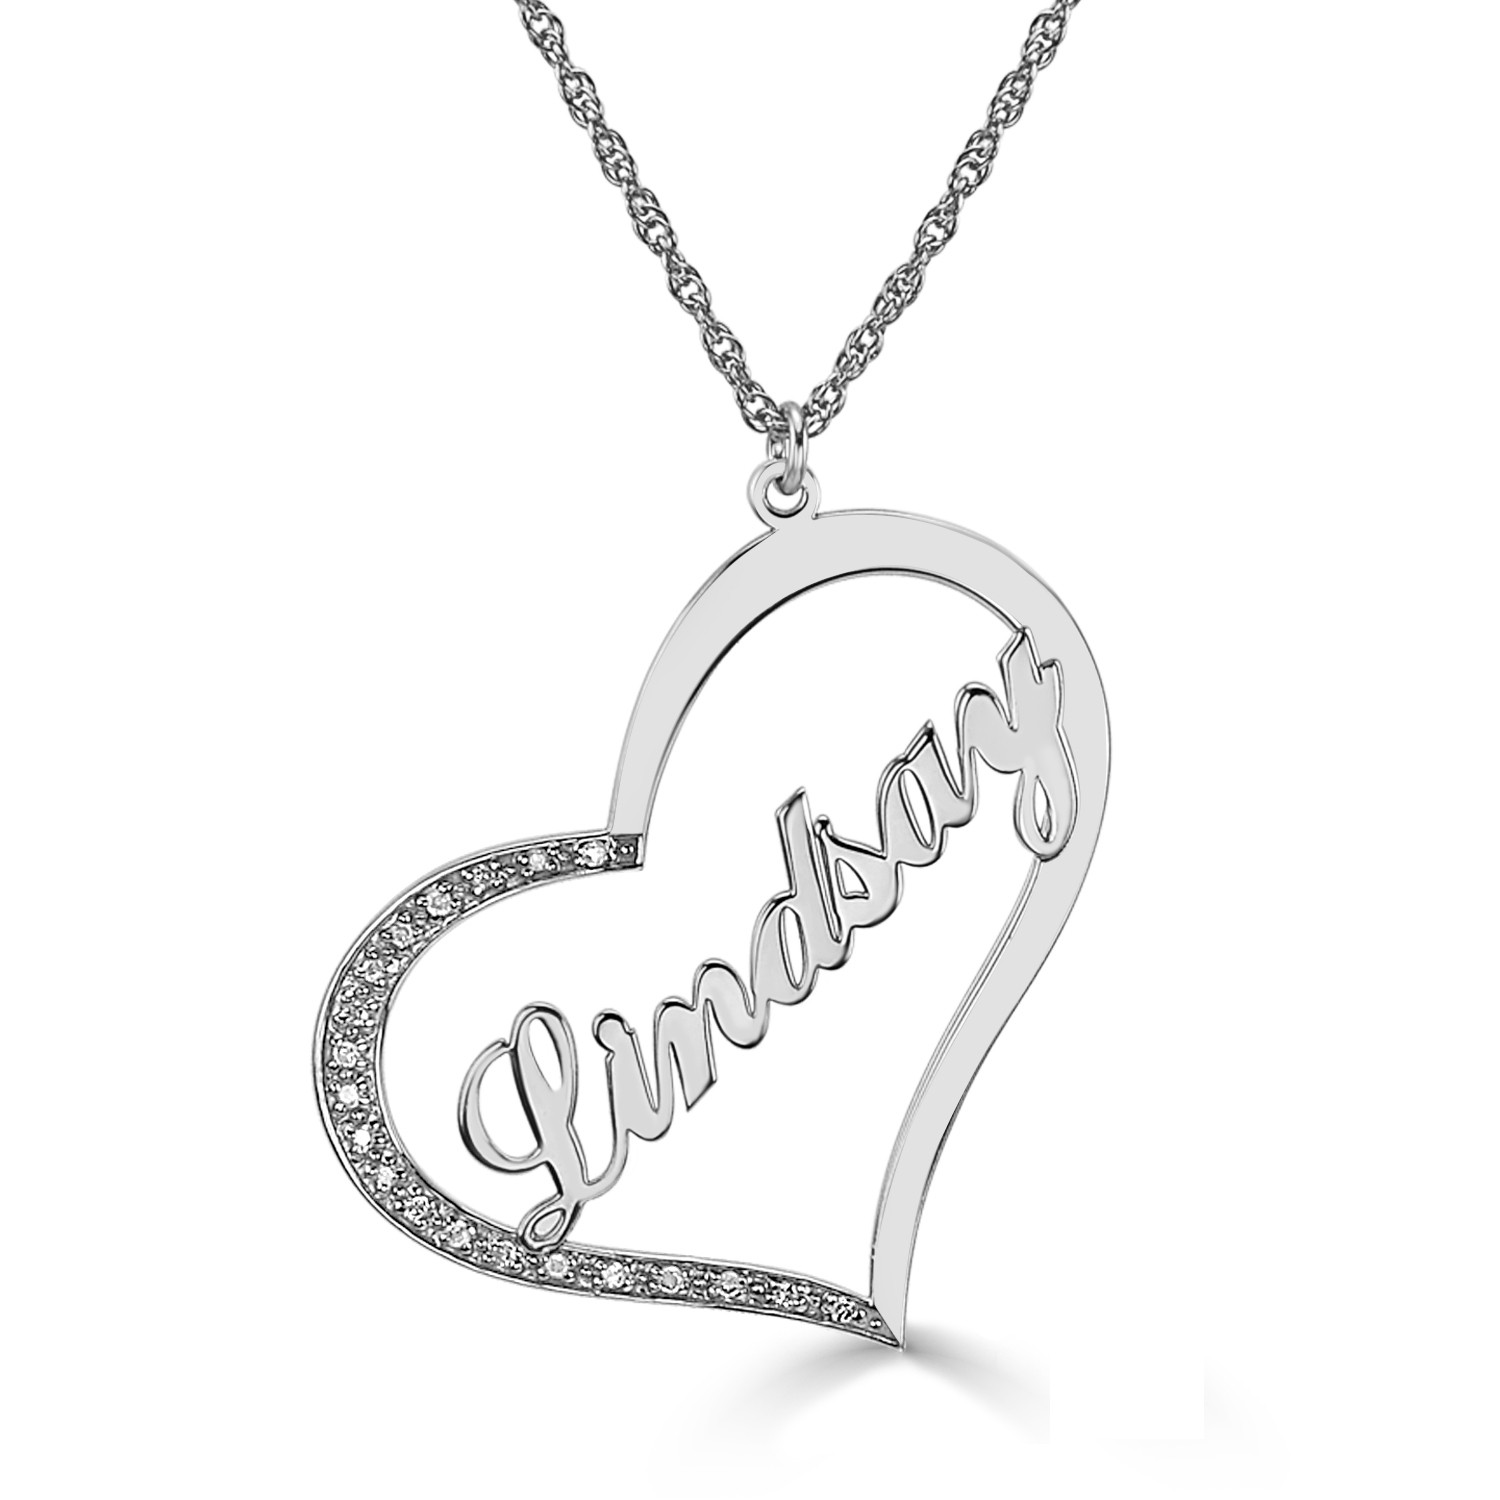 Diamond Tilted Heart Necklace, Silver or White Gold  Jewelry by Johan -  10k White Gold - Jewelry by Johan